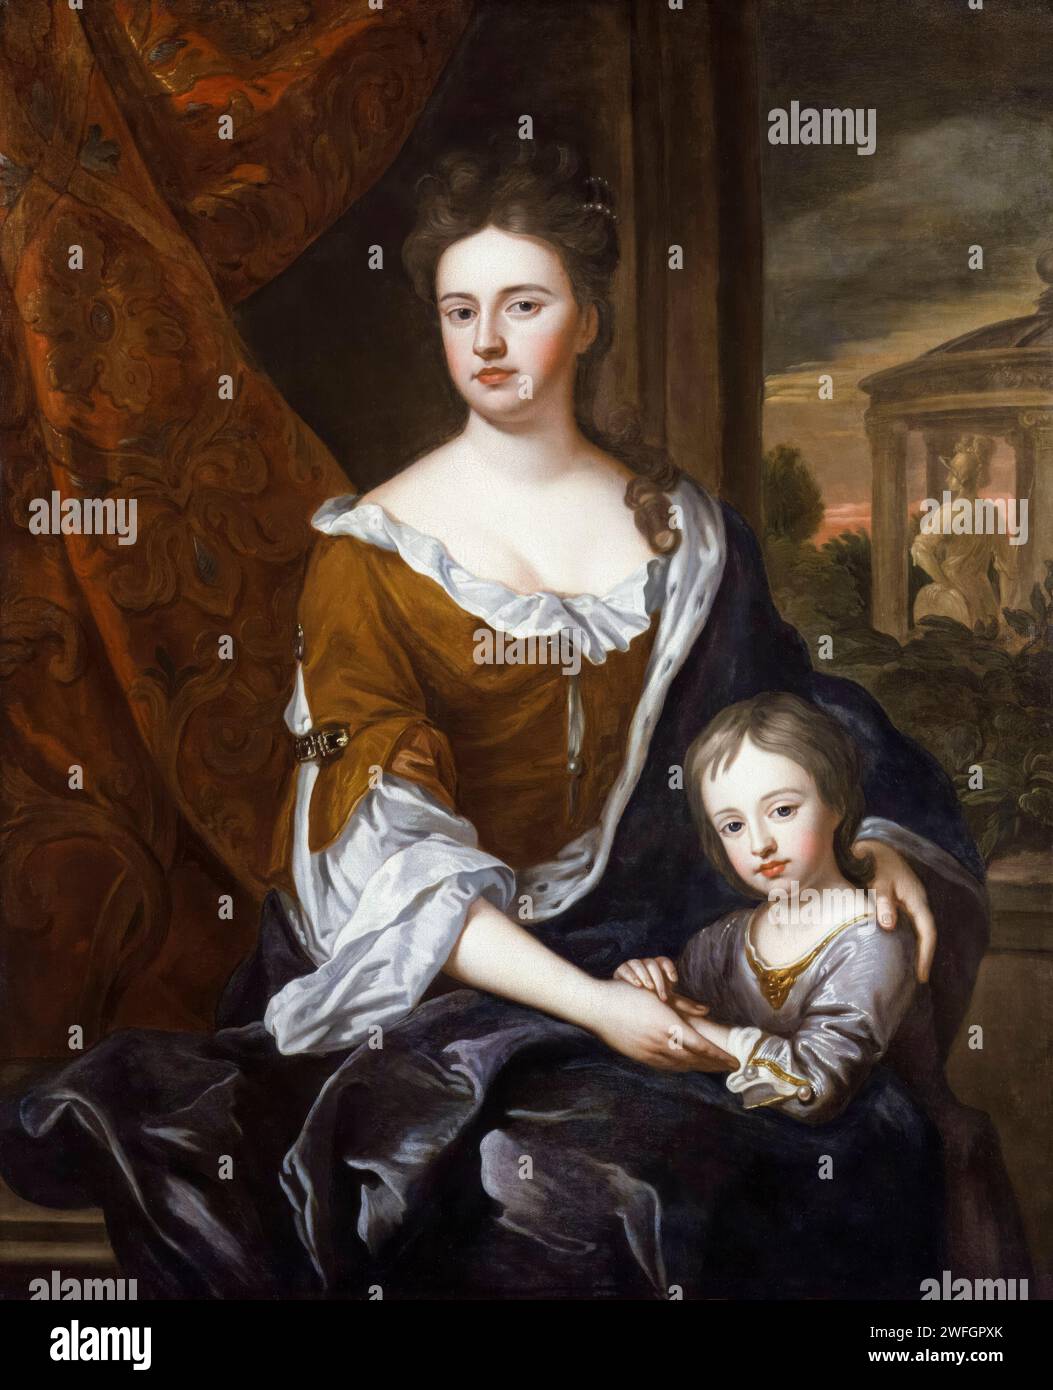 Queen Anne (1665-1714) and her son Prince William, Duke of Gloucester (1689-1700), portrait painting in oil on canvas after Sir Godfrey Kneller, circa 1694 Stock Photo